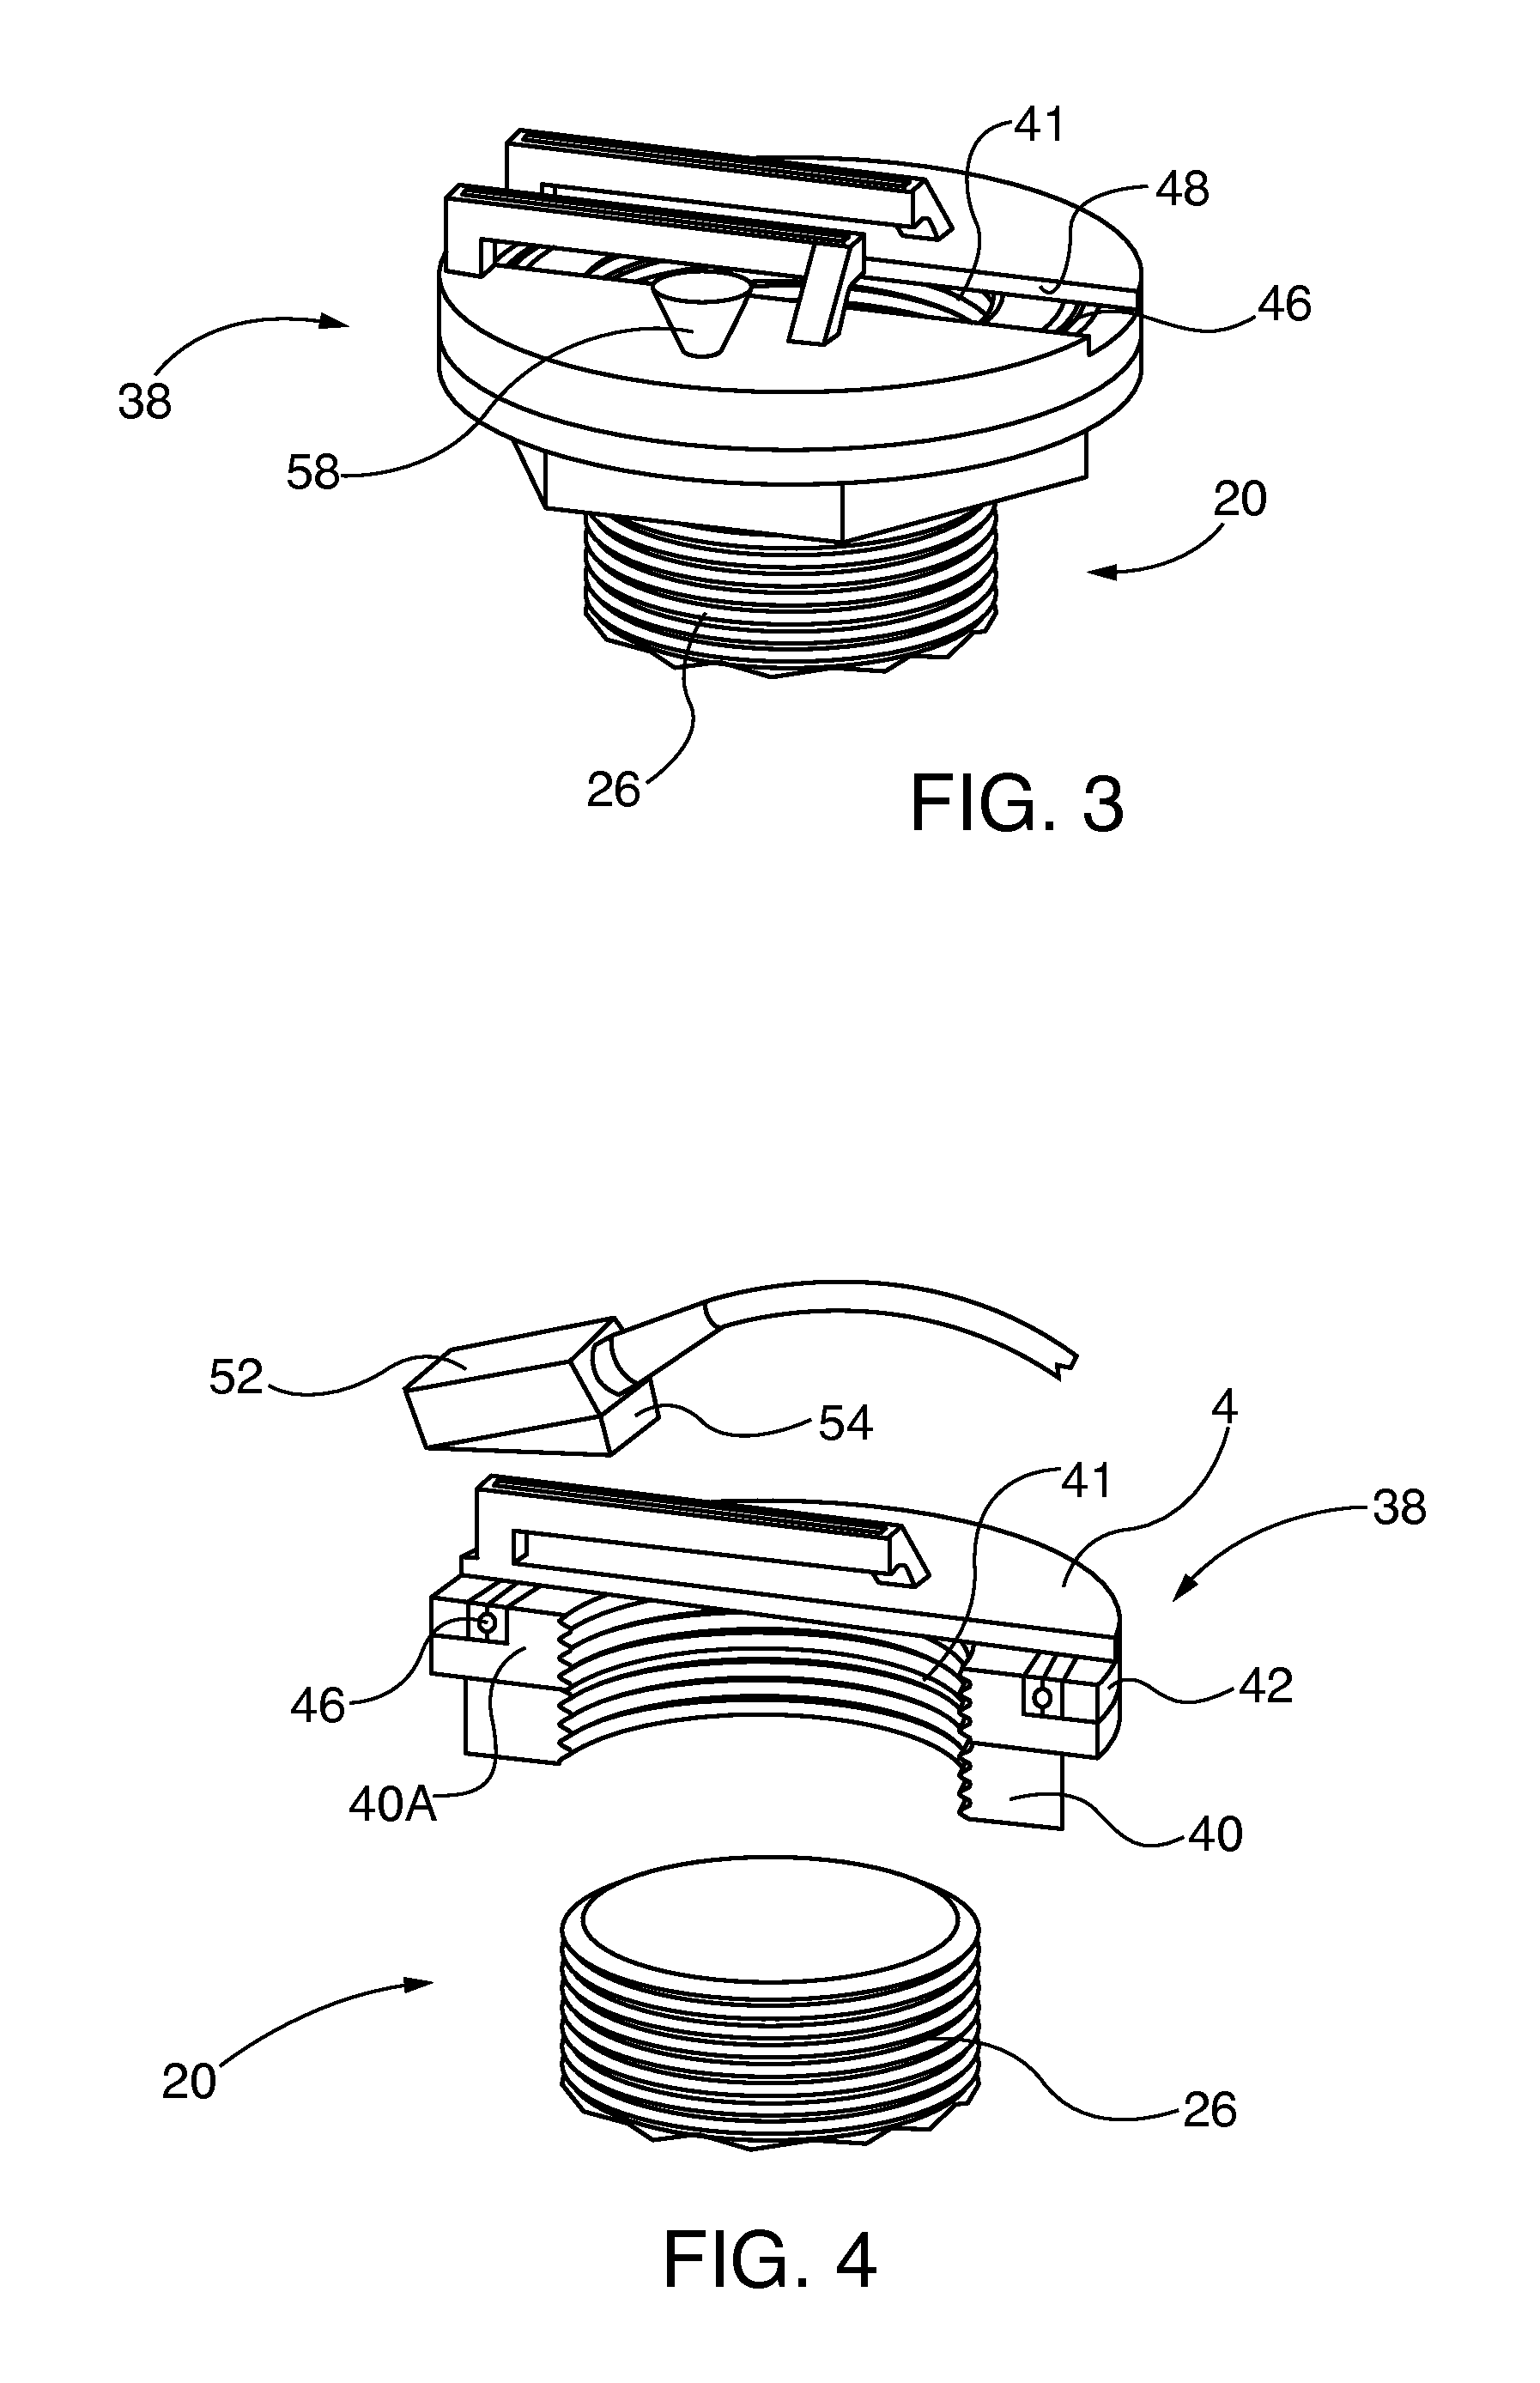 Phased array ultrasonic bolt inspection apparatus and method